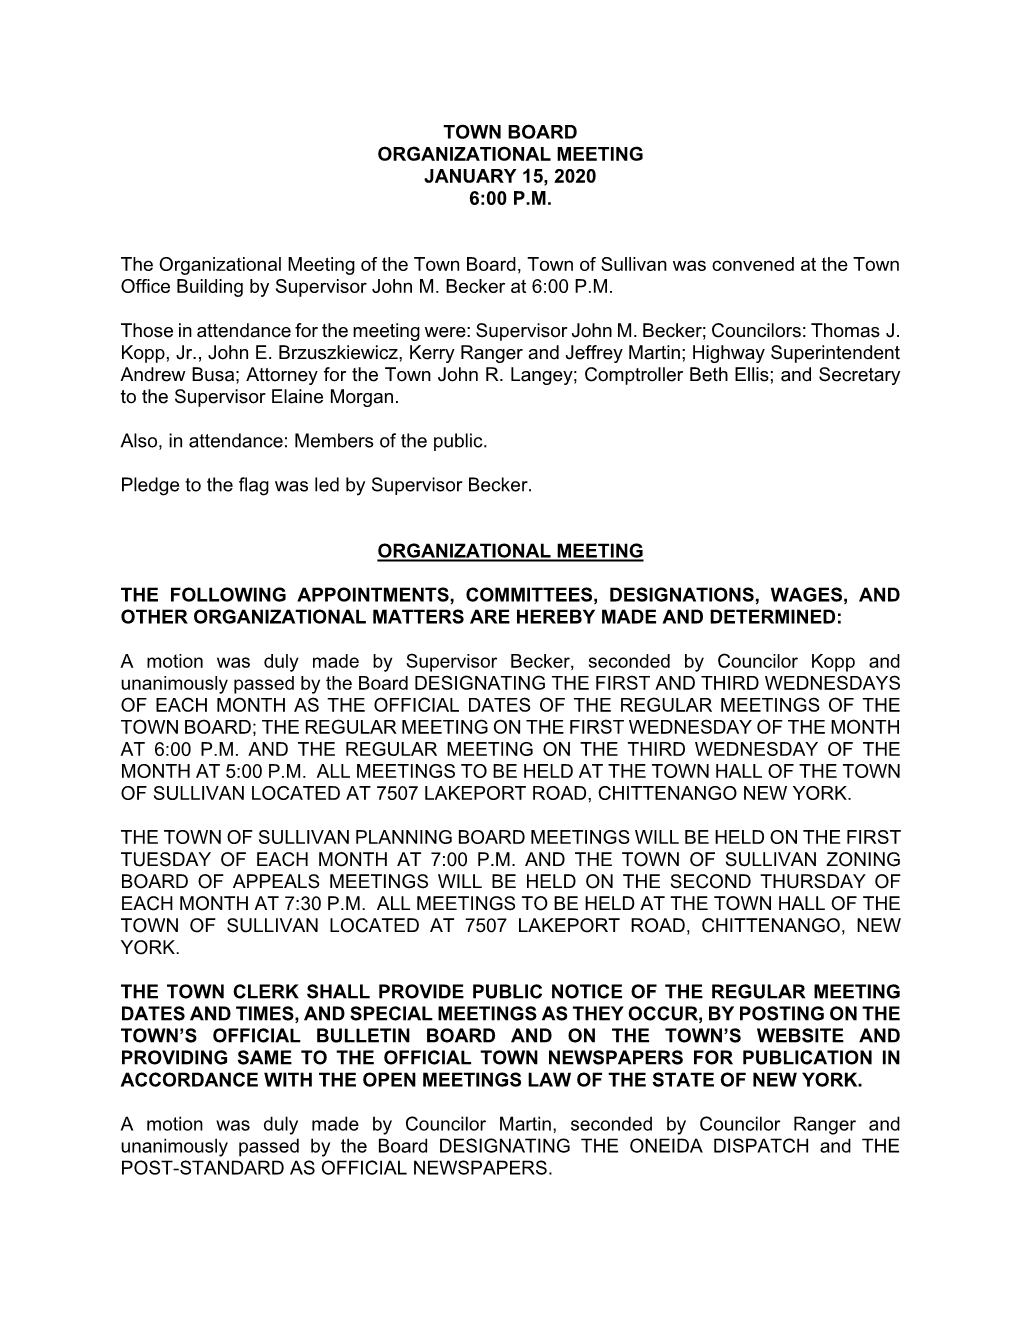 January 15, 2020 Town Board Minutes